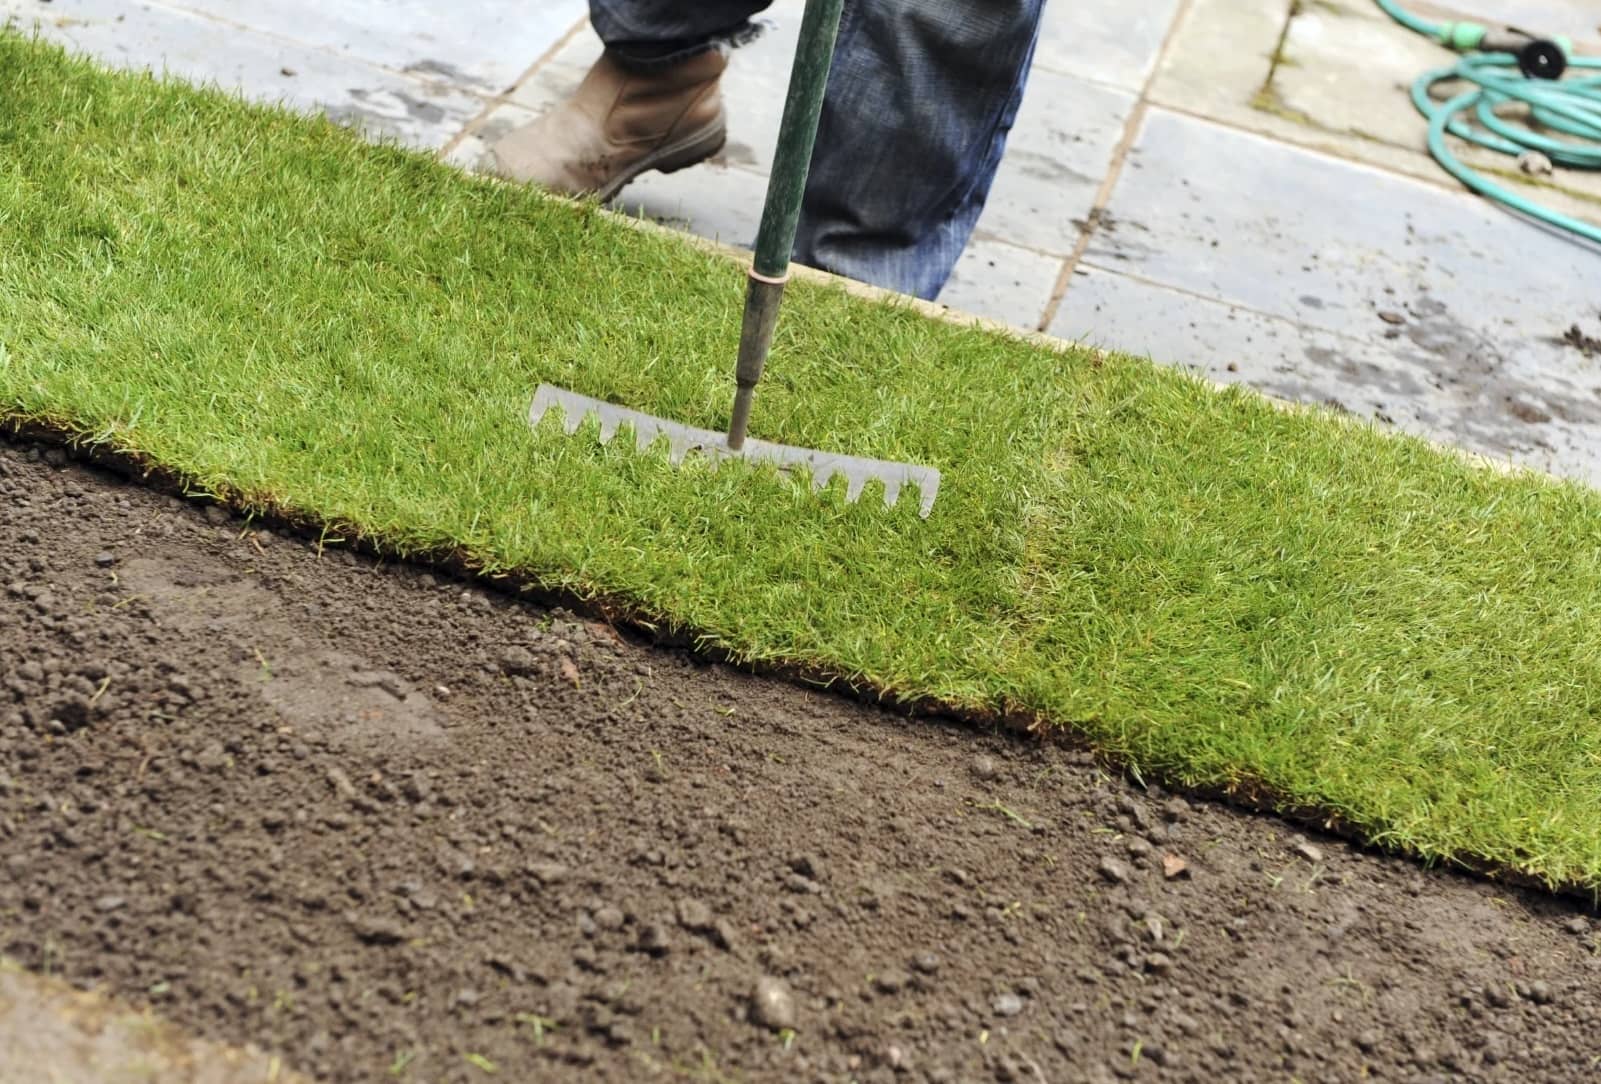 How To Put Down Fake Grass On Dirt